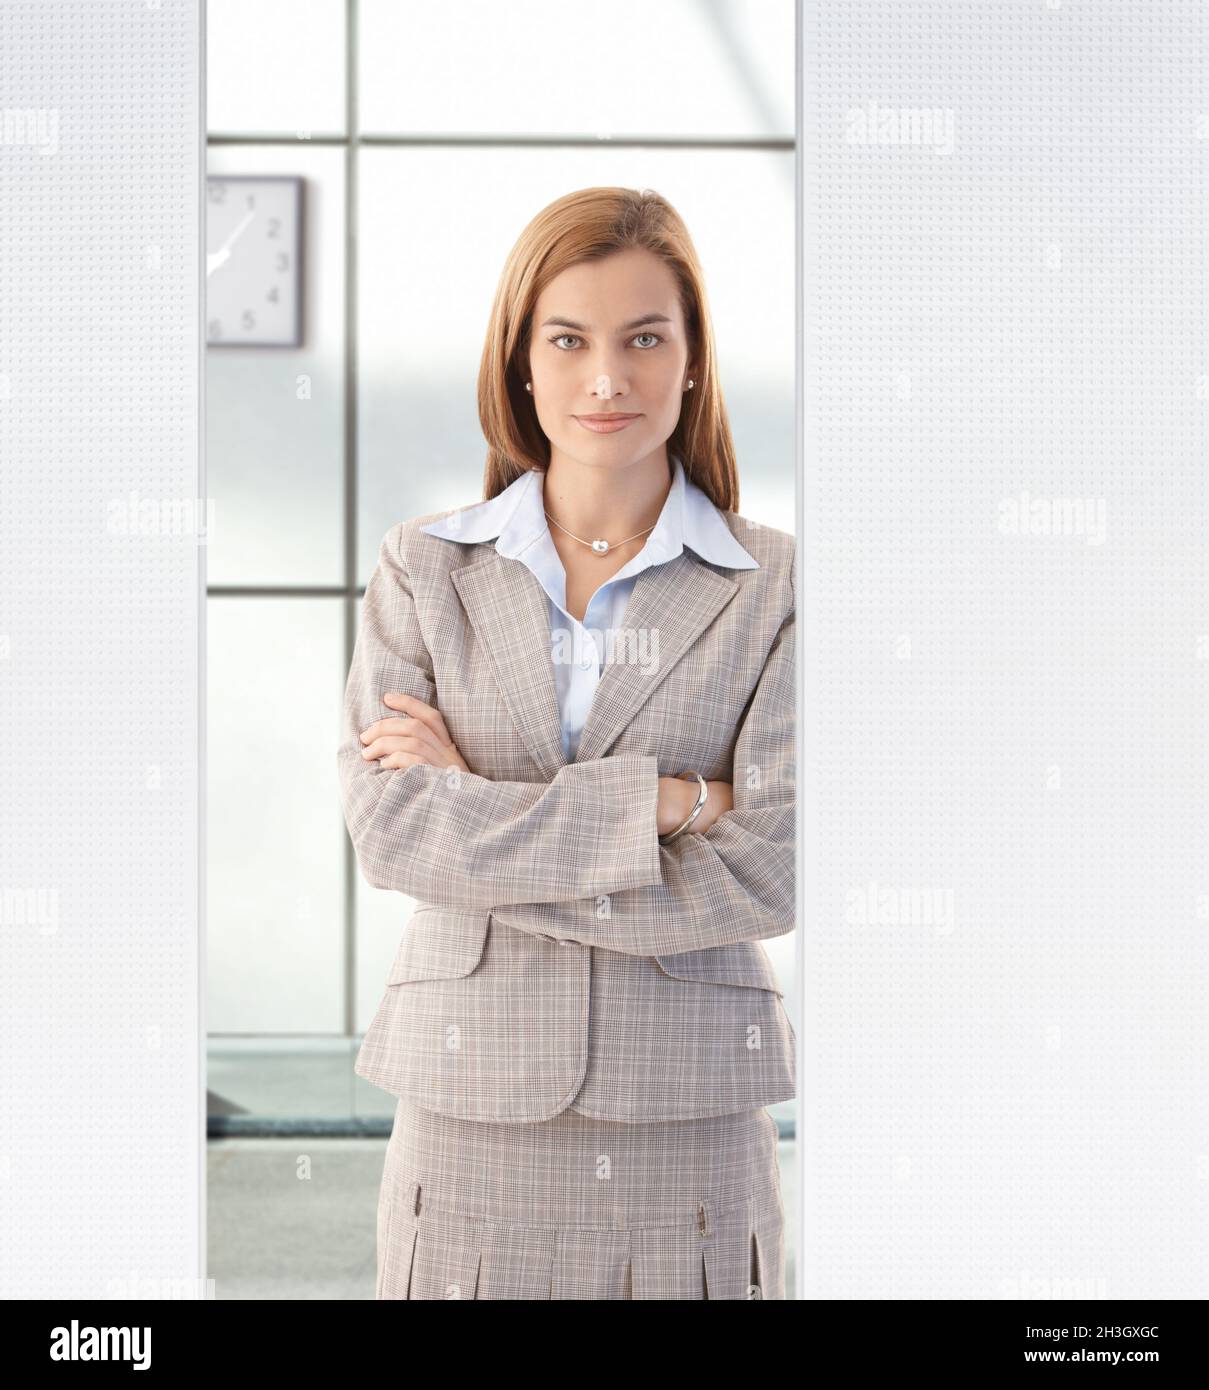 Pretty businesswoman standing in office smiling Stock Photo